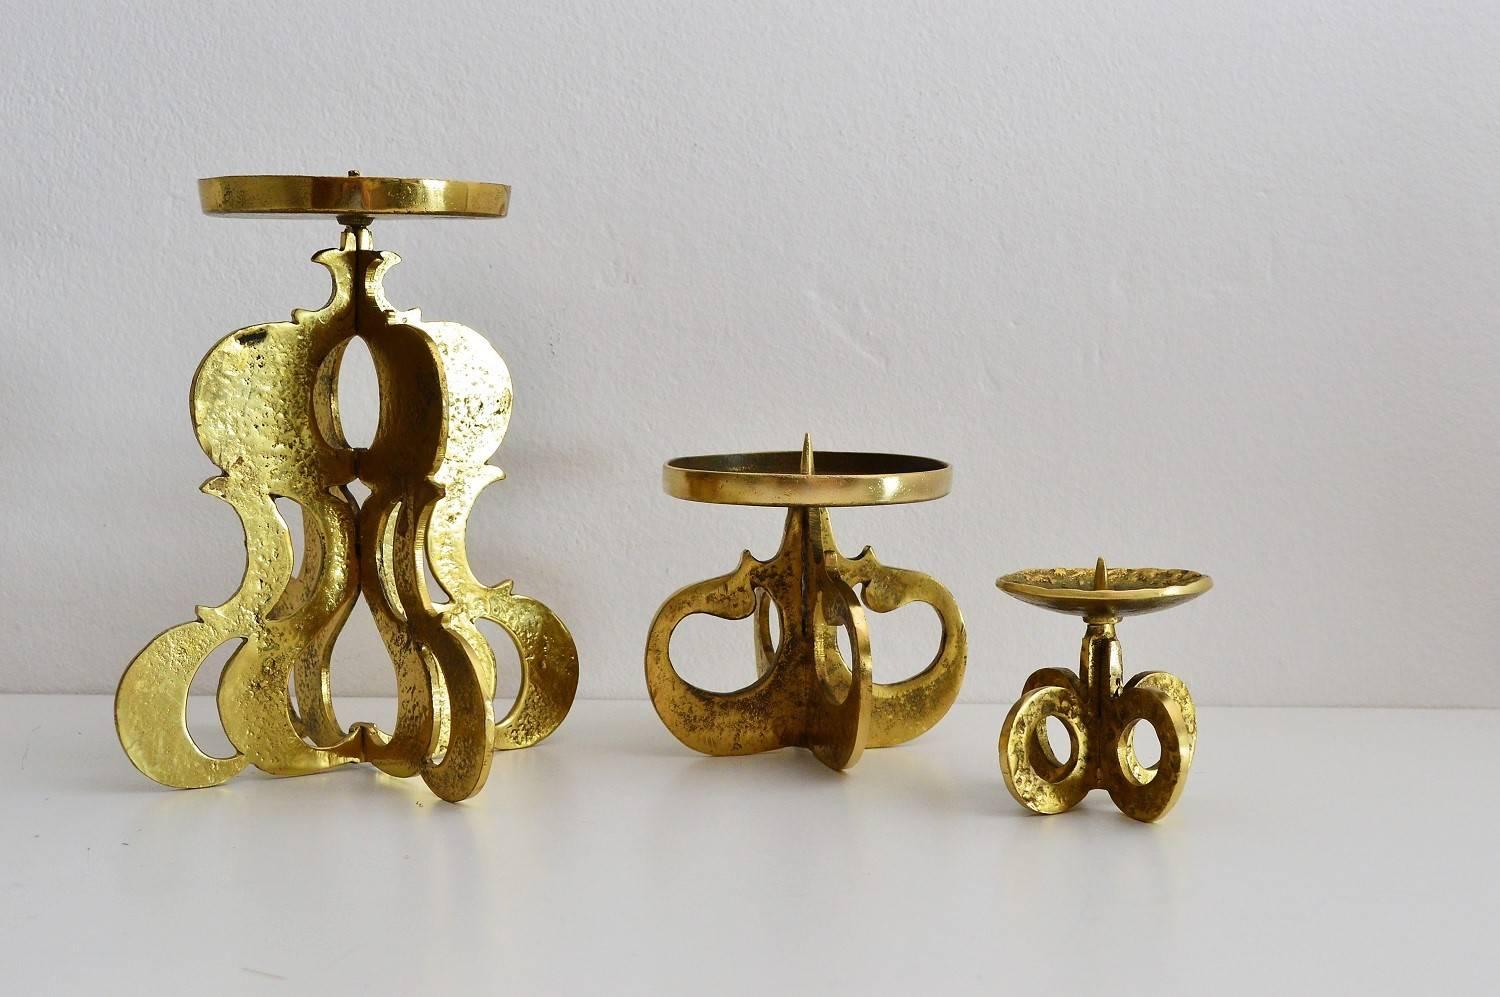 Beautiful set of three candlestick holders in massive brass.
Made in Germany in the 1970s.
The candleholders are of different size and form; all three are hand made and heavy.
Excellent condition.
The sizes of the two smaller ones are:
H 12 cm,